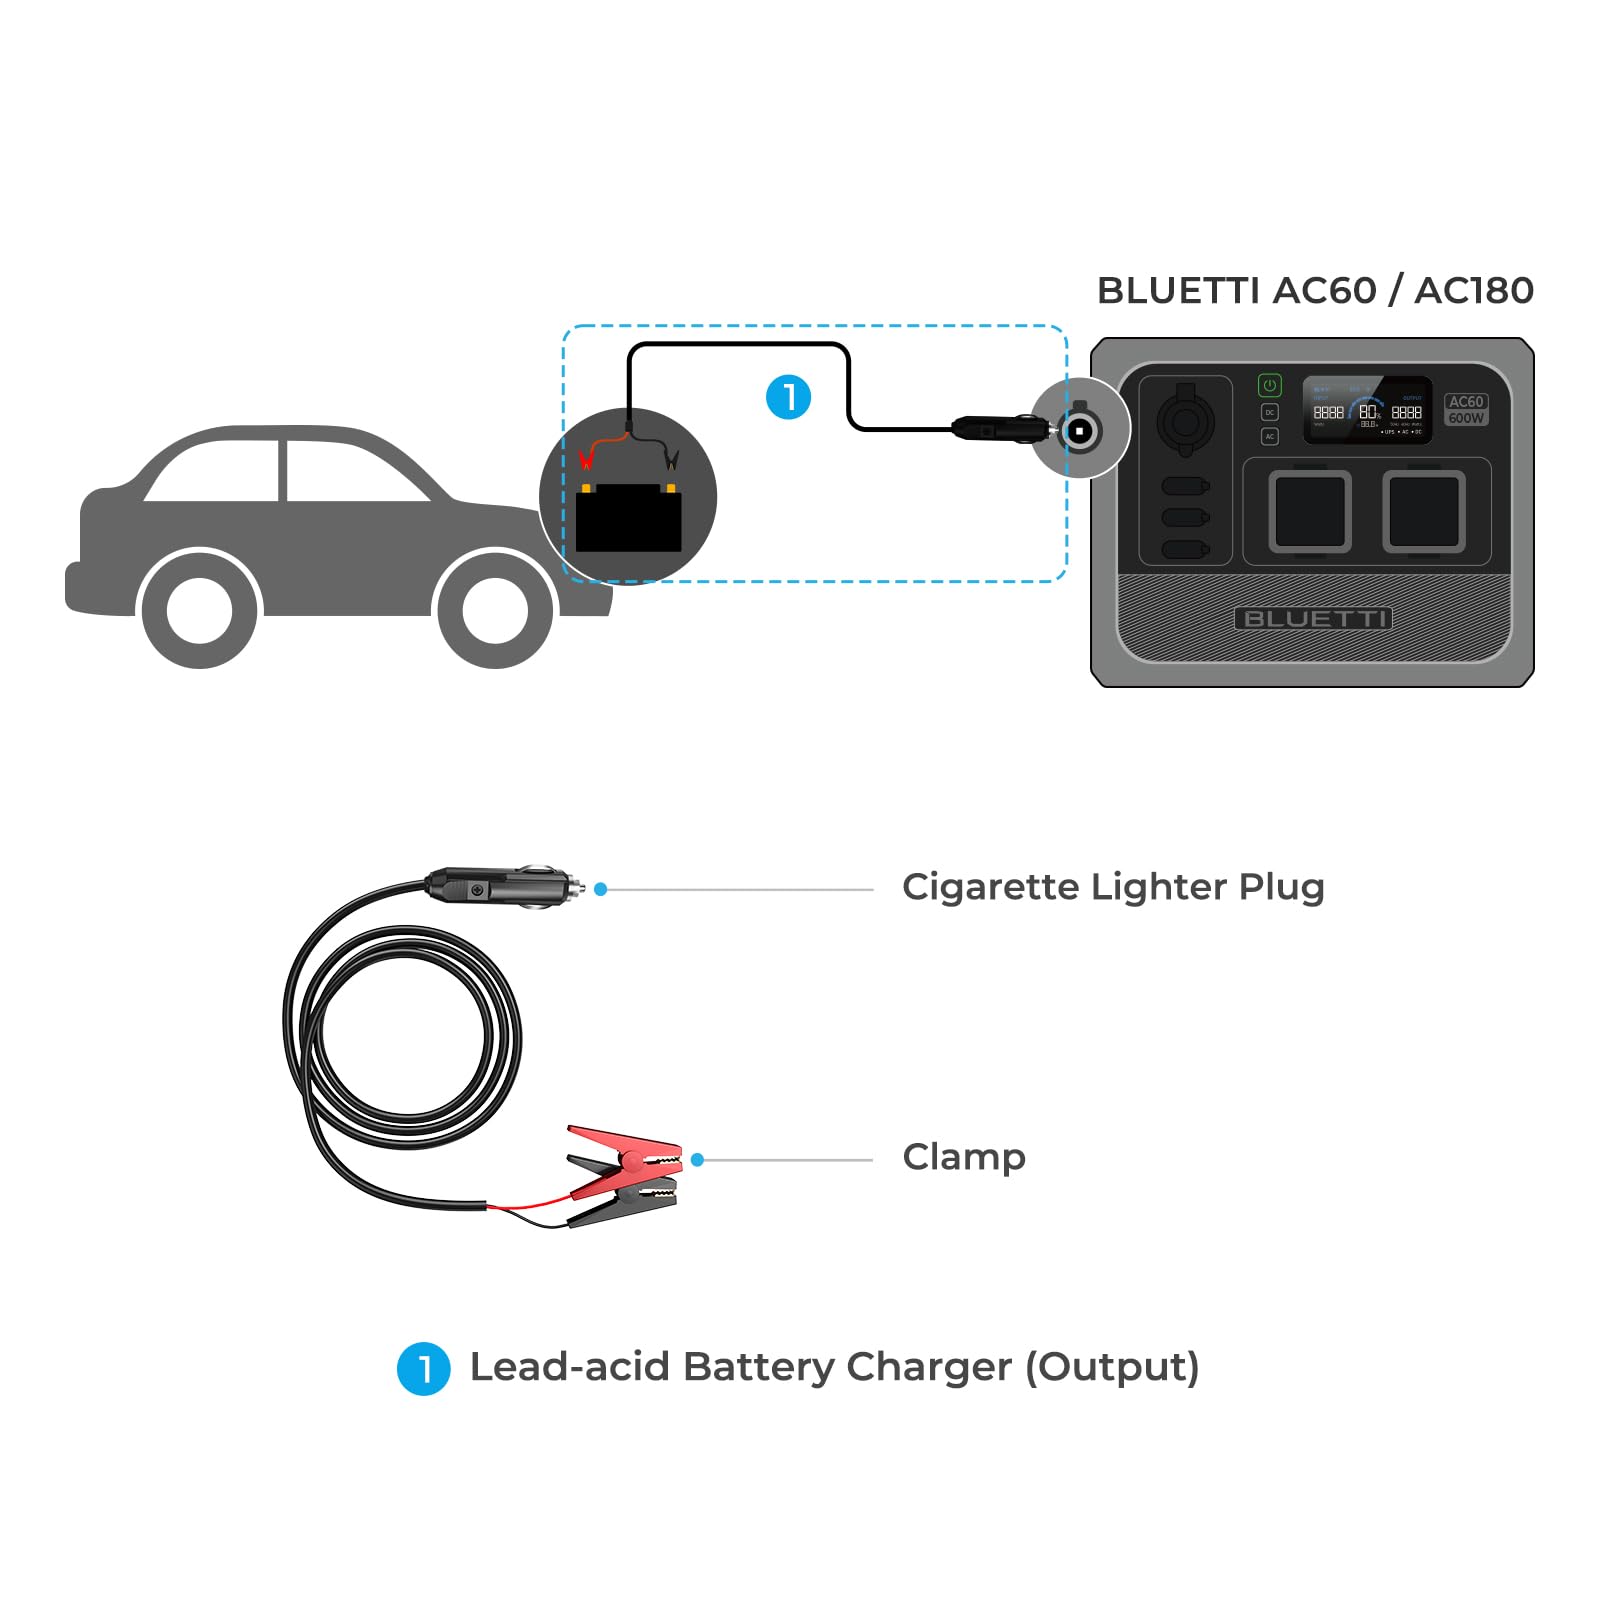 BLUETTI Lead-Acid Battery Charger, Cigarette Lighter to Clamp Cable, Charging Lead-Acid Battery via The Cigarette Lighter Port of BLUETTI Portable Power Station AC70, AC180, AC60